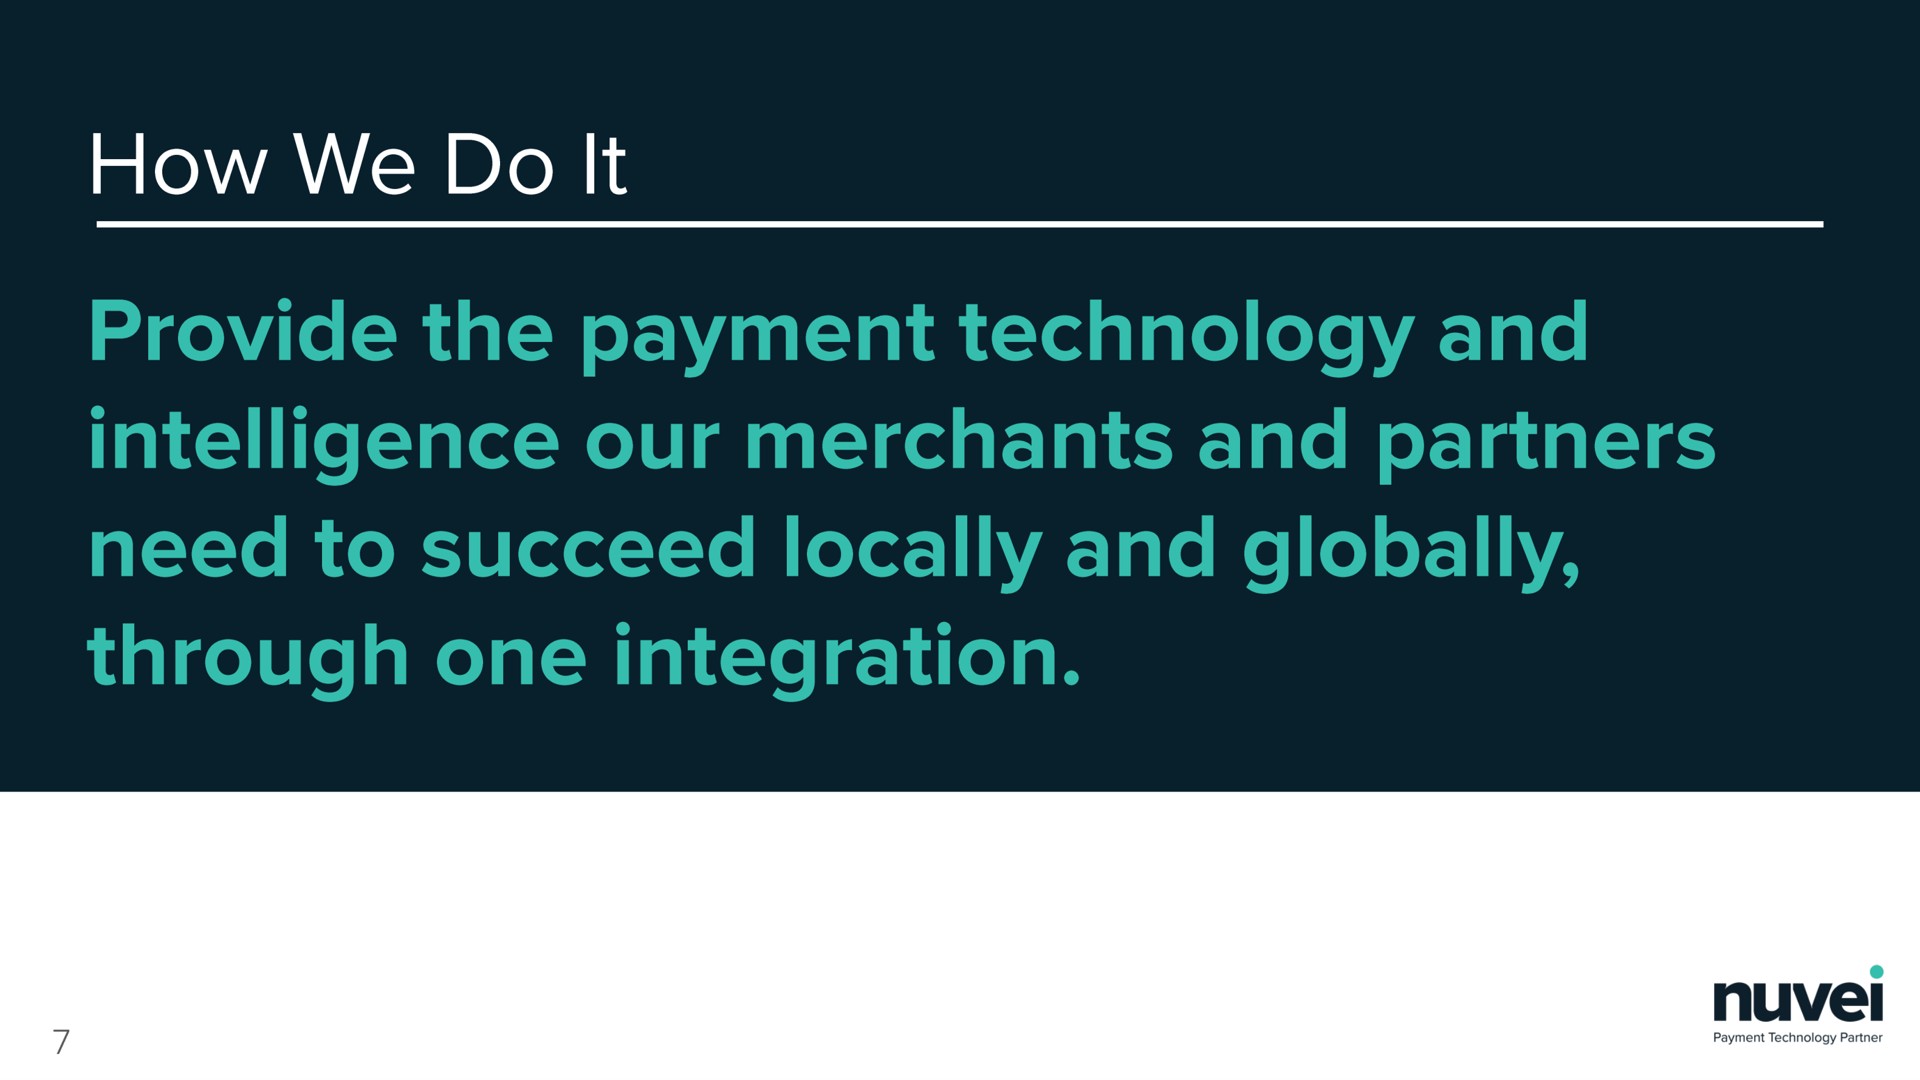 how we do provide the payment technology and intelligence our merchants and partners need to succeed locally and globally through one integration | Nuvei